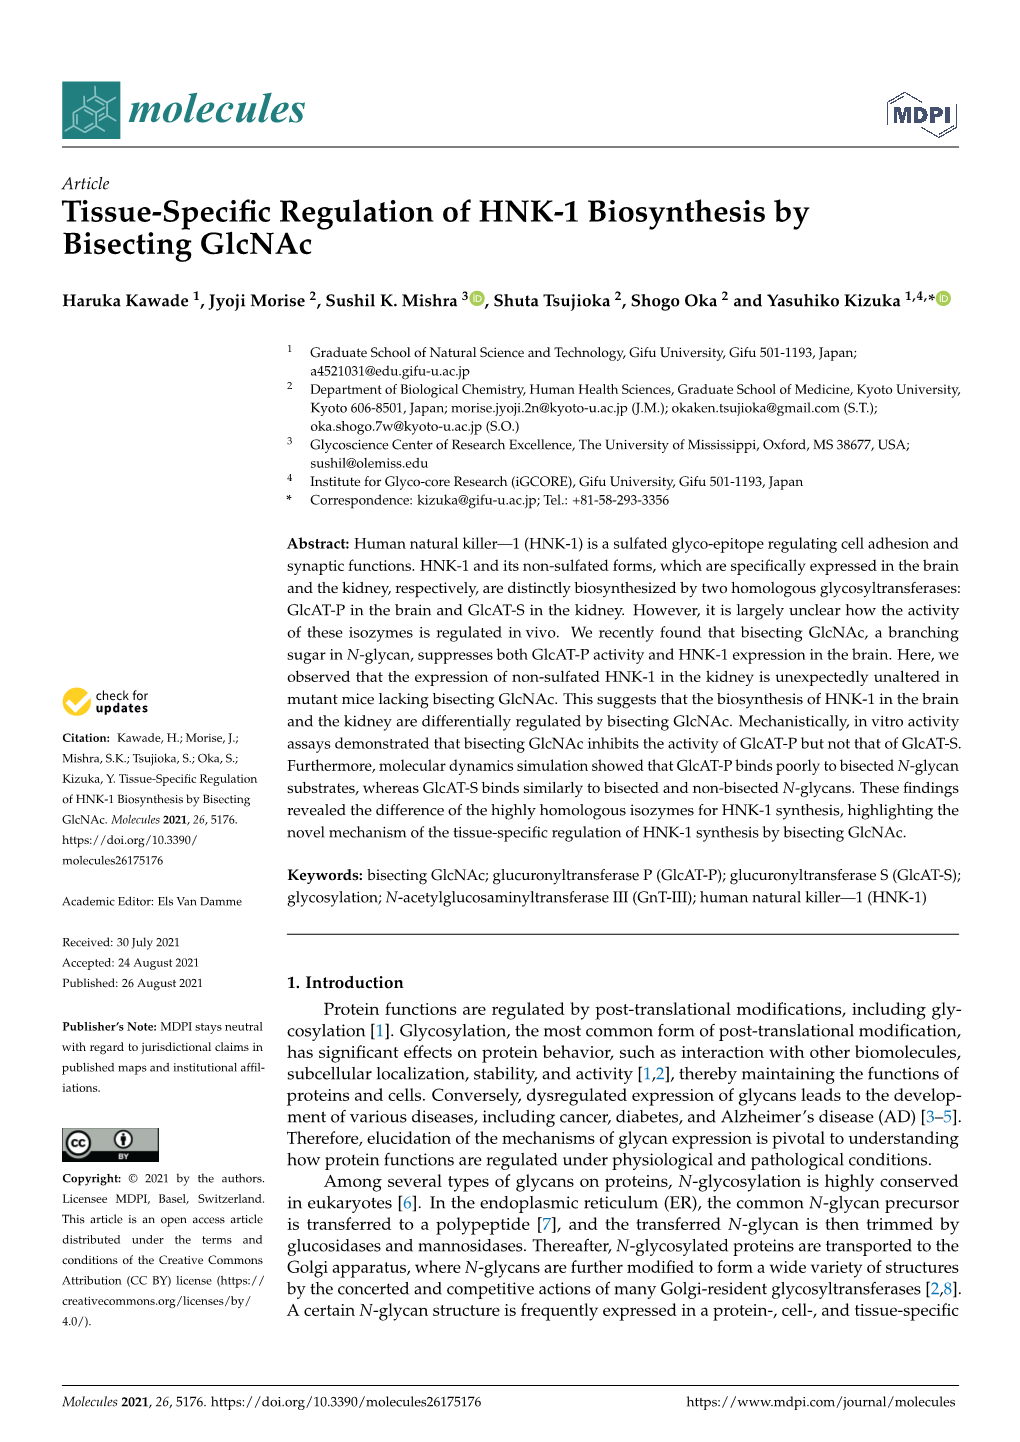 Tissue-Specific Regulation of HNK-1 Biosynthesis by Bisecting Glcnac